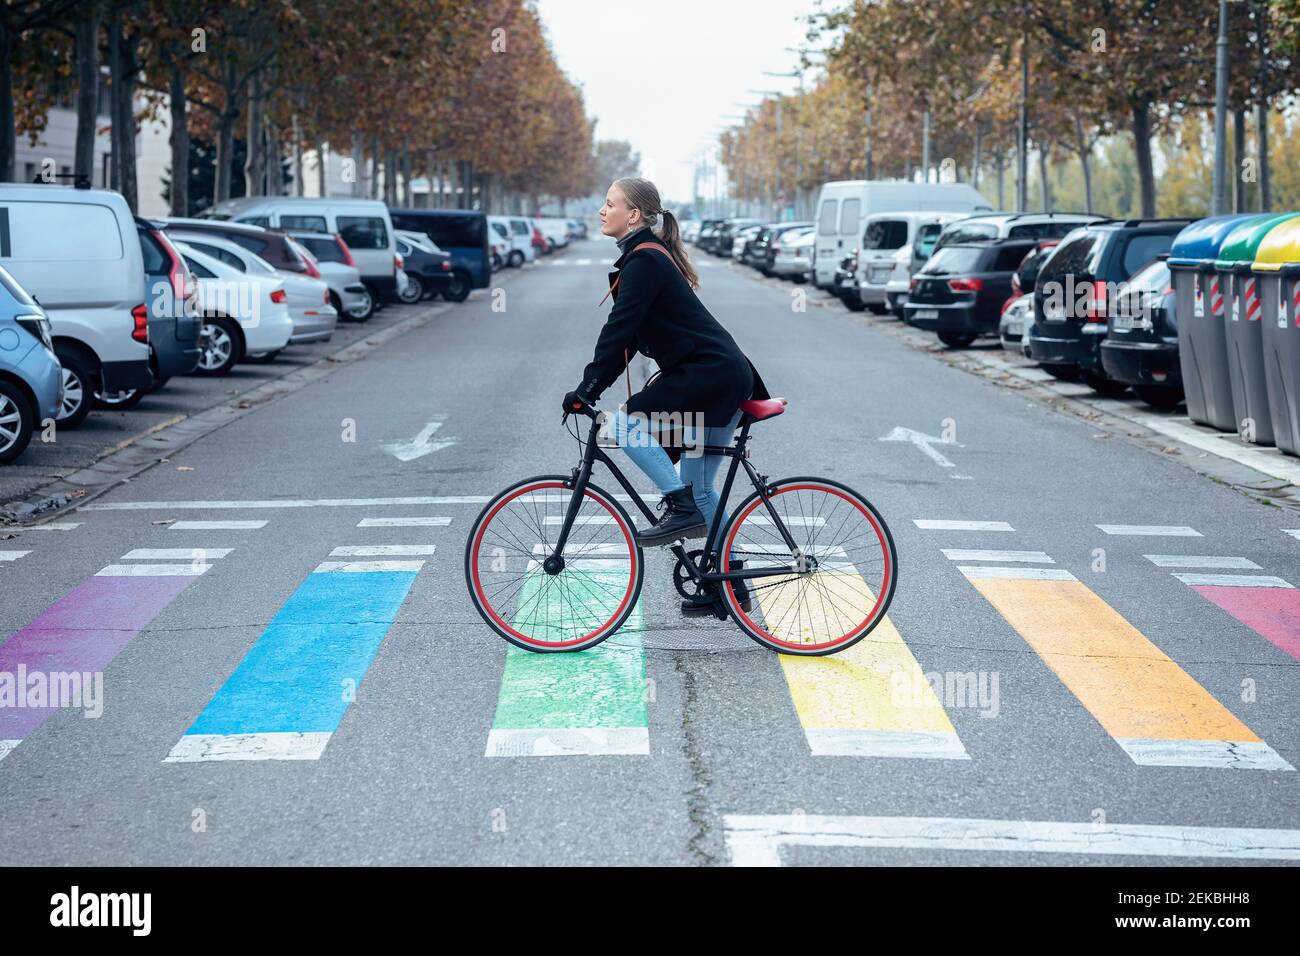 Woman cycling on multi colored zebra crossing Stock Photo